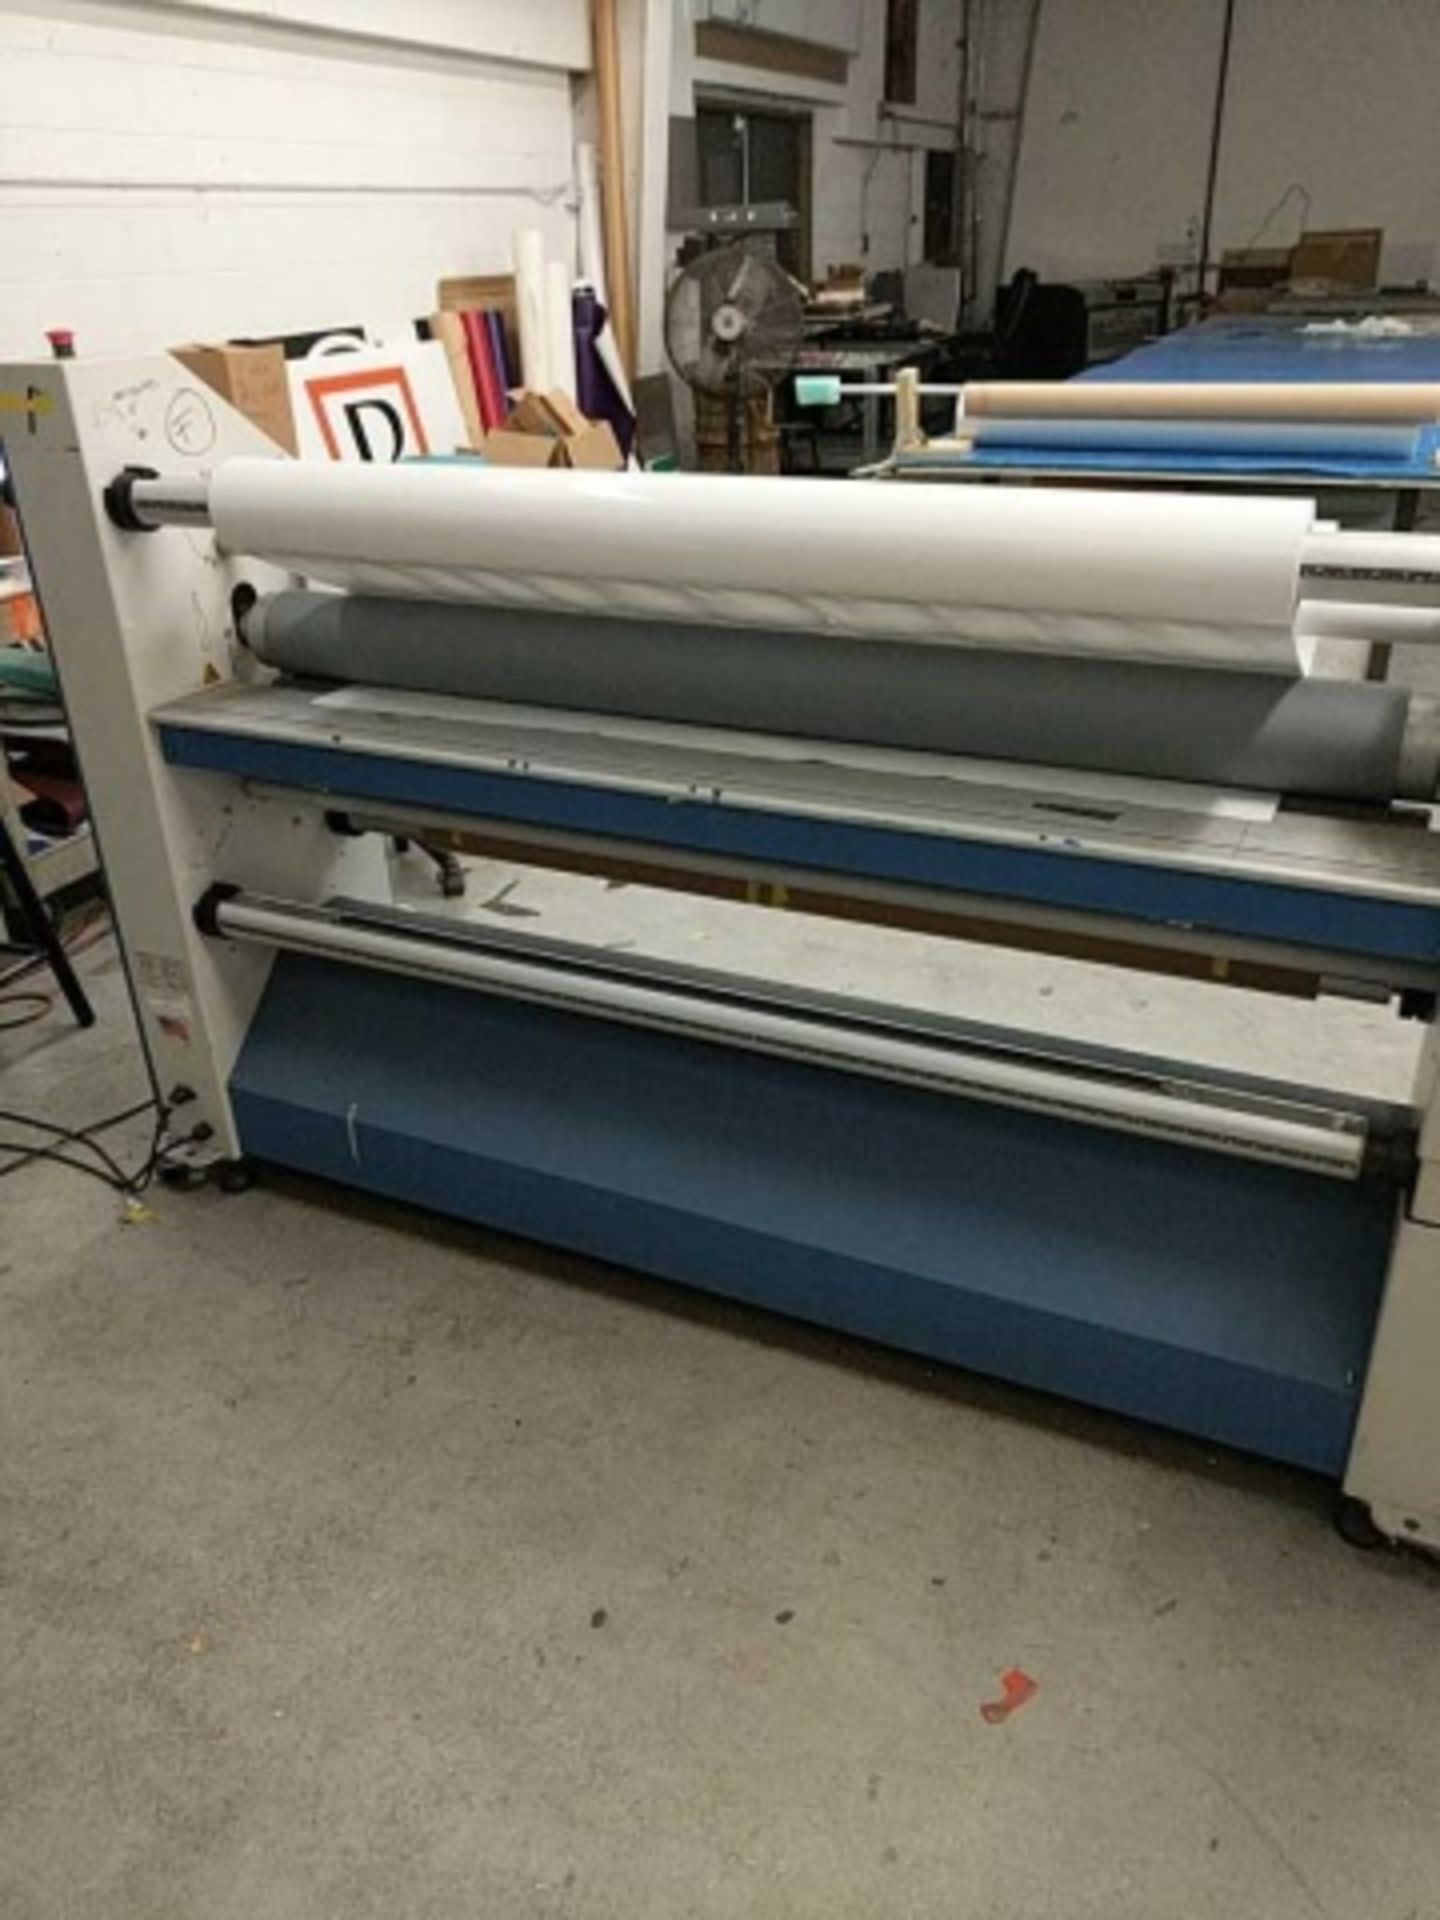 Seal 62 Pro C Wide Format Cold Laminator - Image 4 of 5